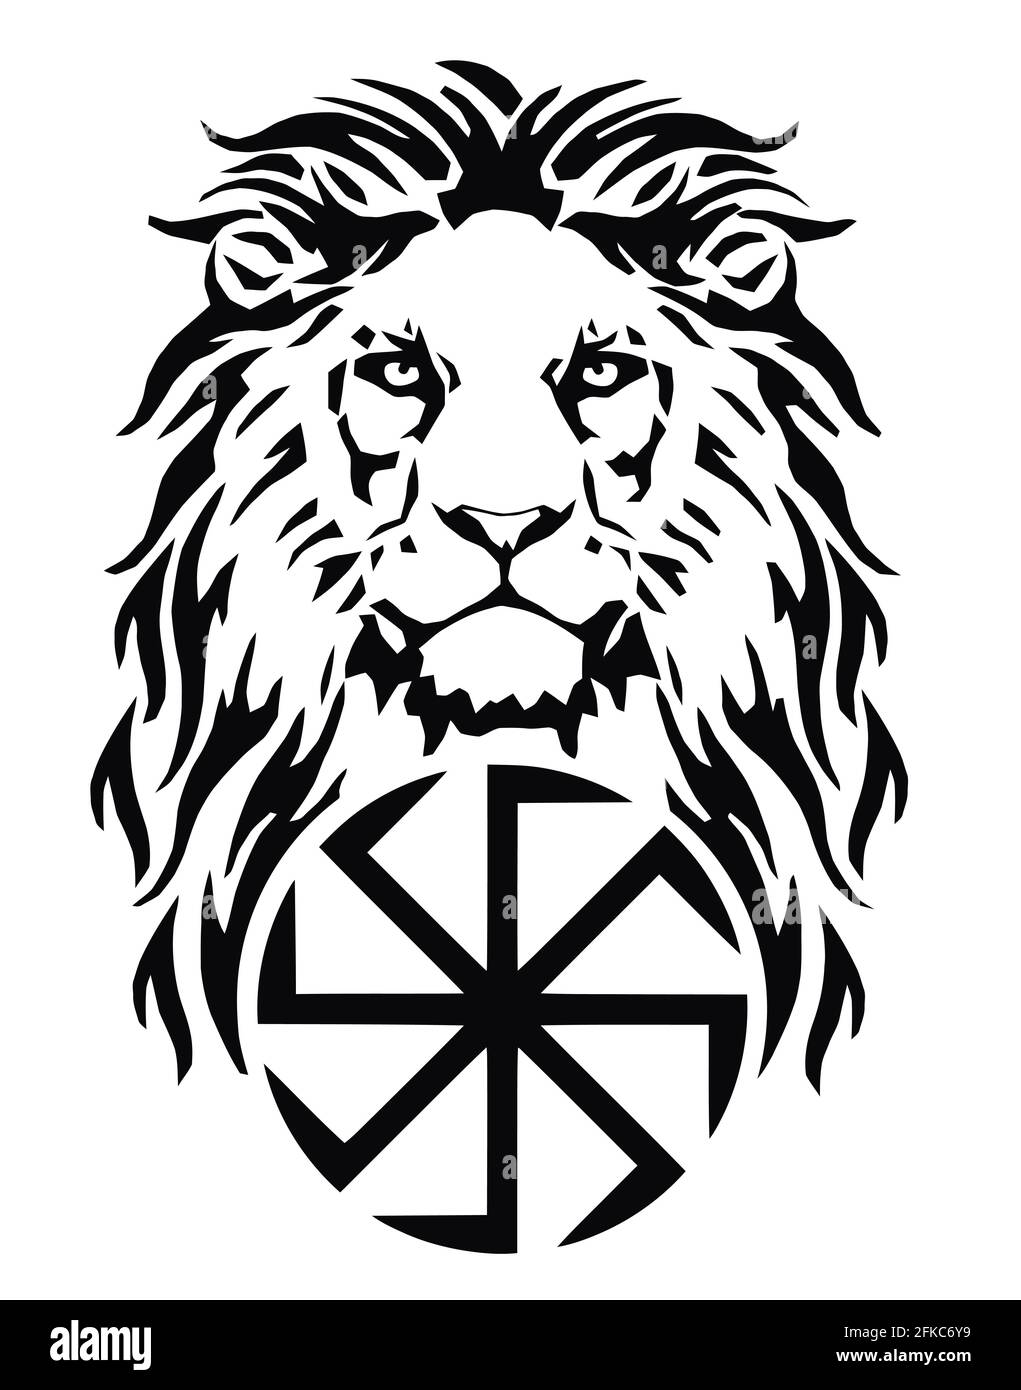 The Lion's head and celtic cross, drawing for tattoo, on a white background, illustration, black and white Stock Photo